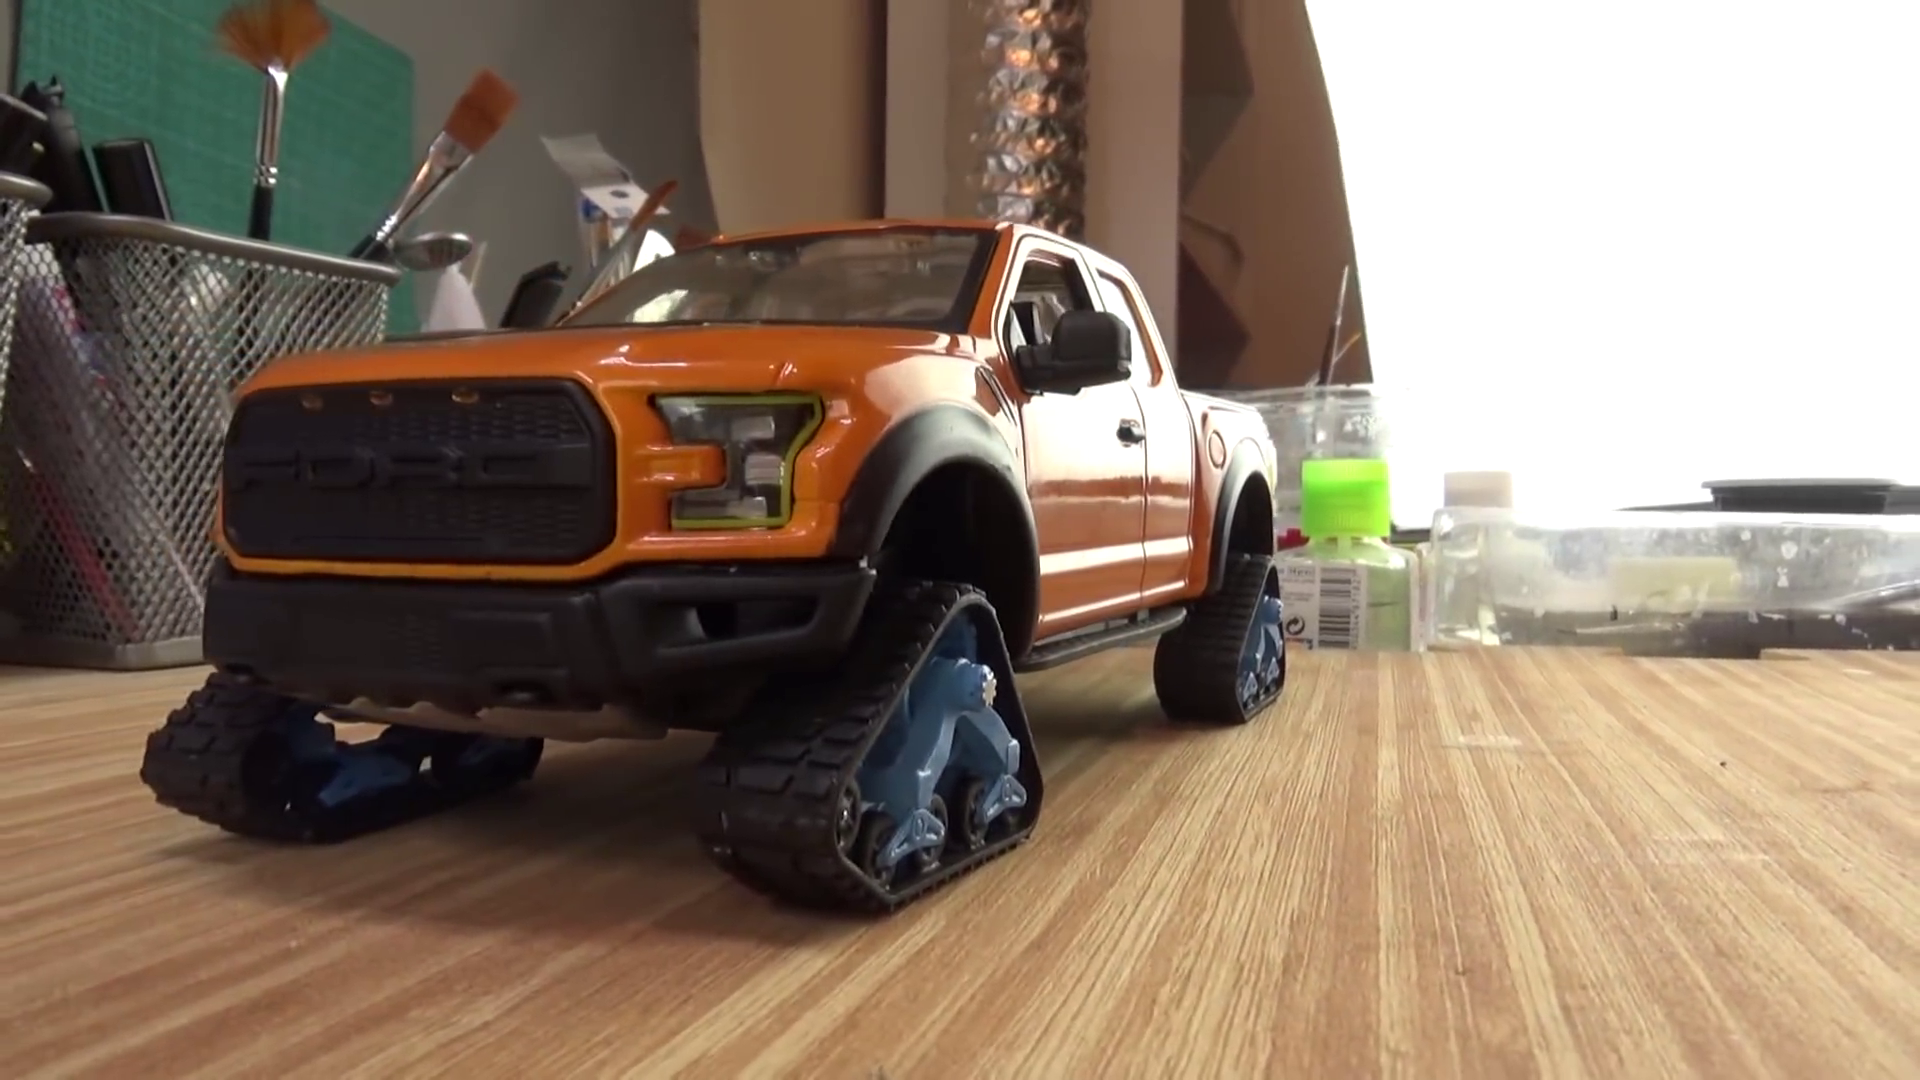 Toy Raptor Becomes Highly Detailed Art, Thanks to YouTuber